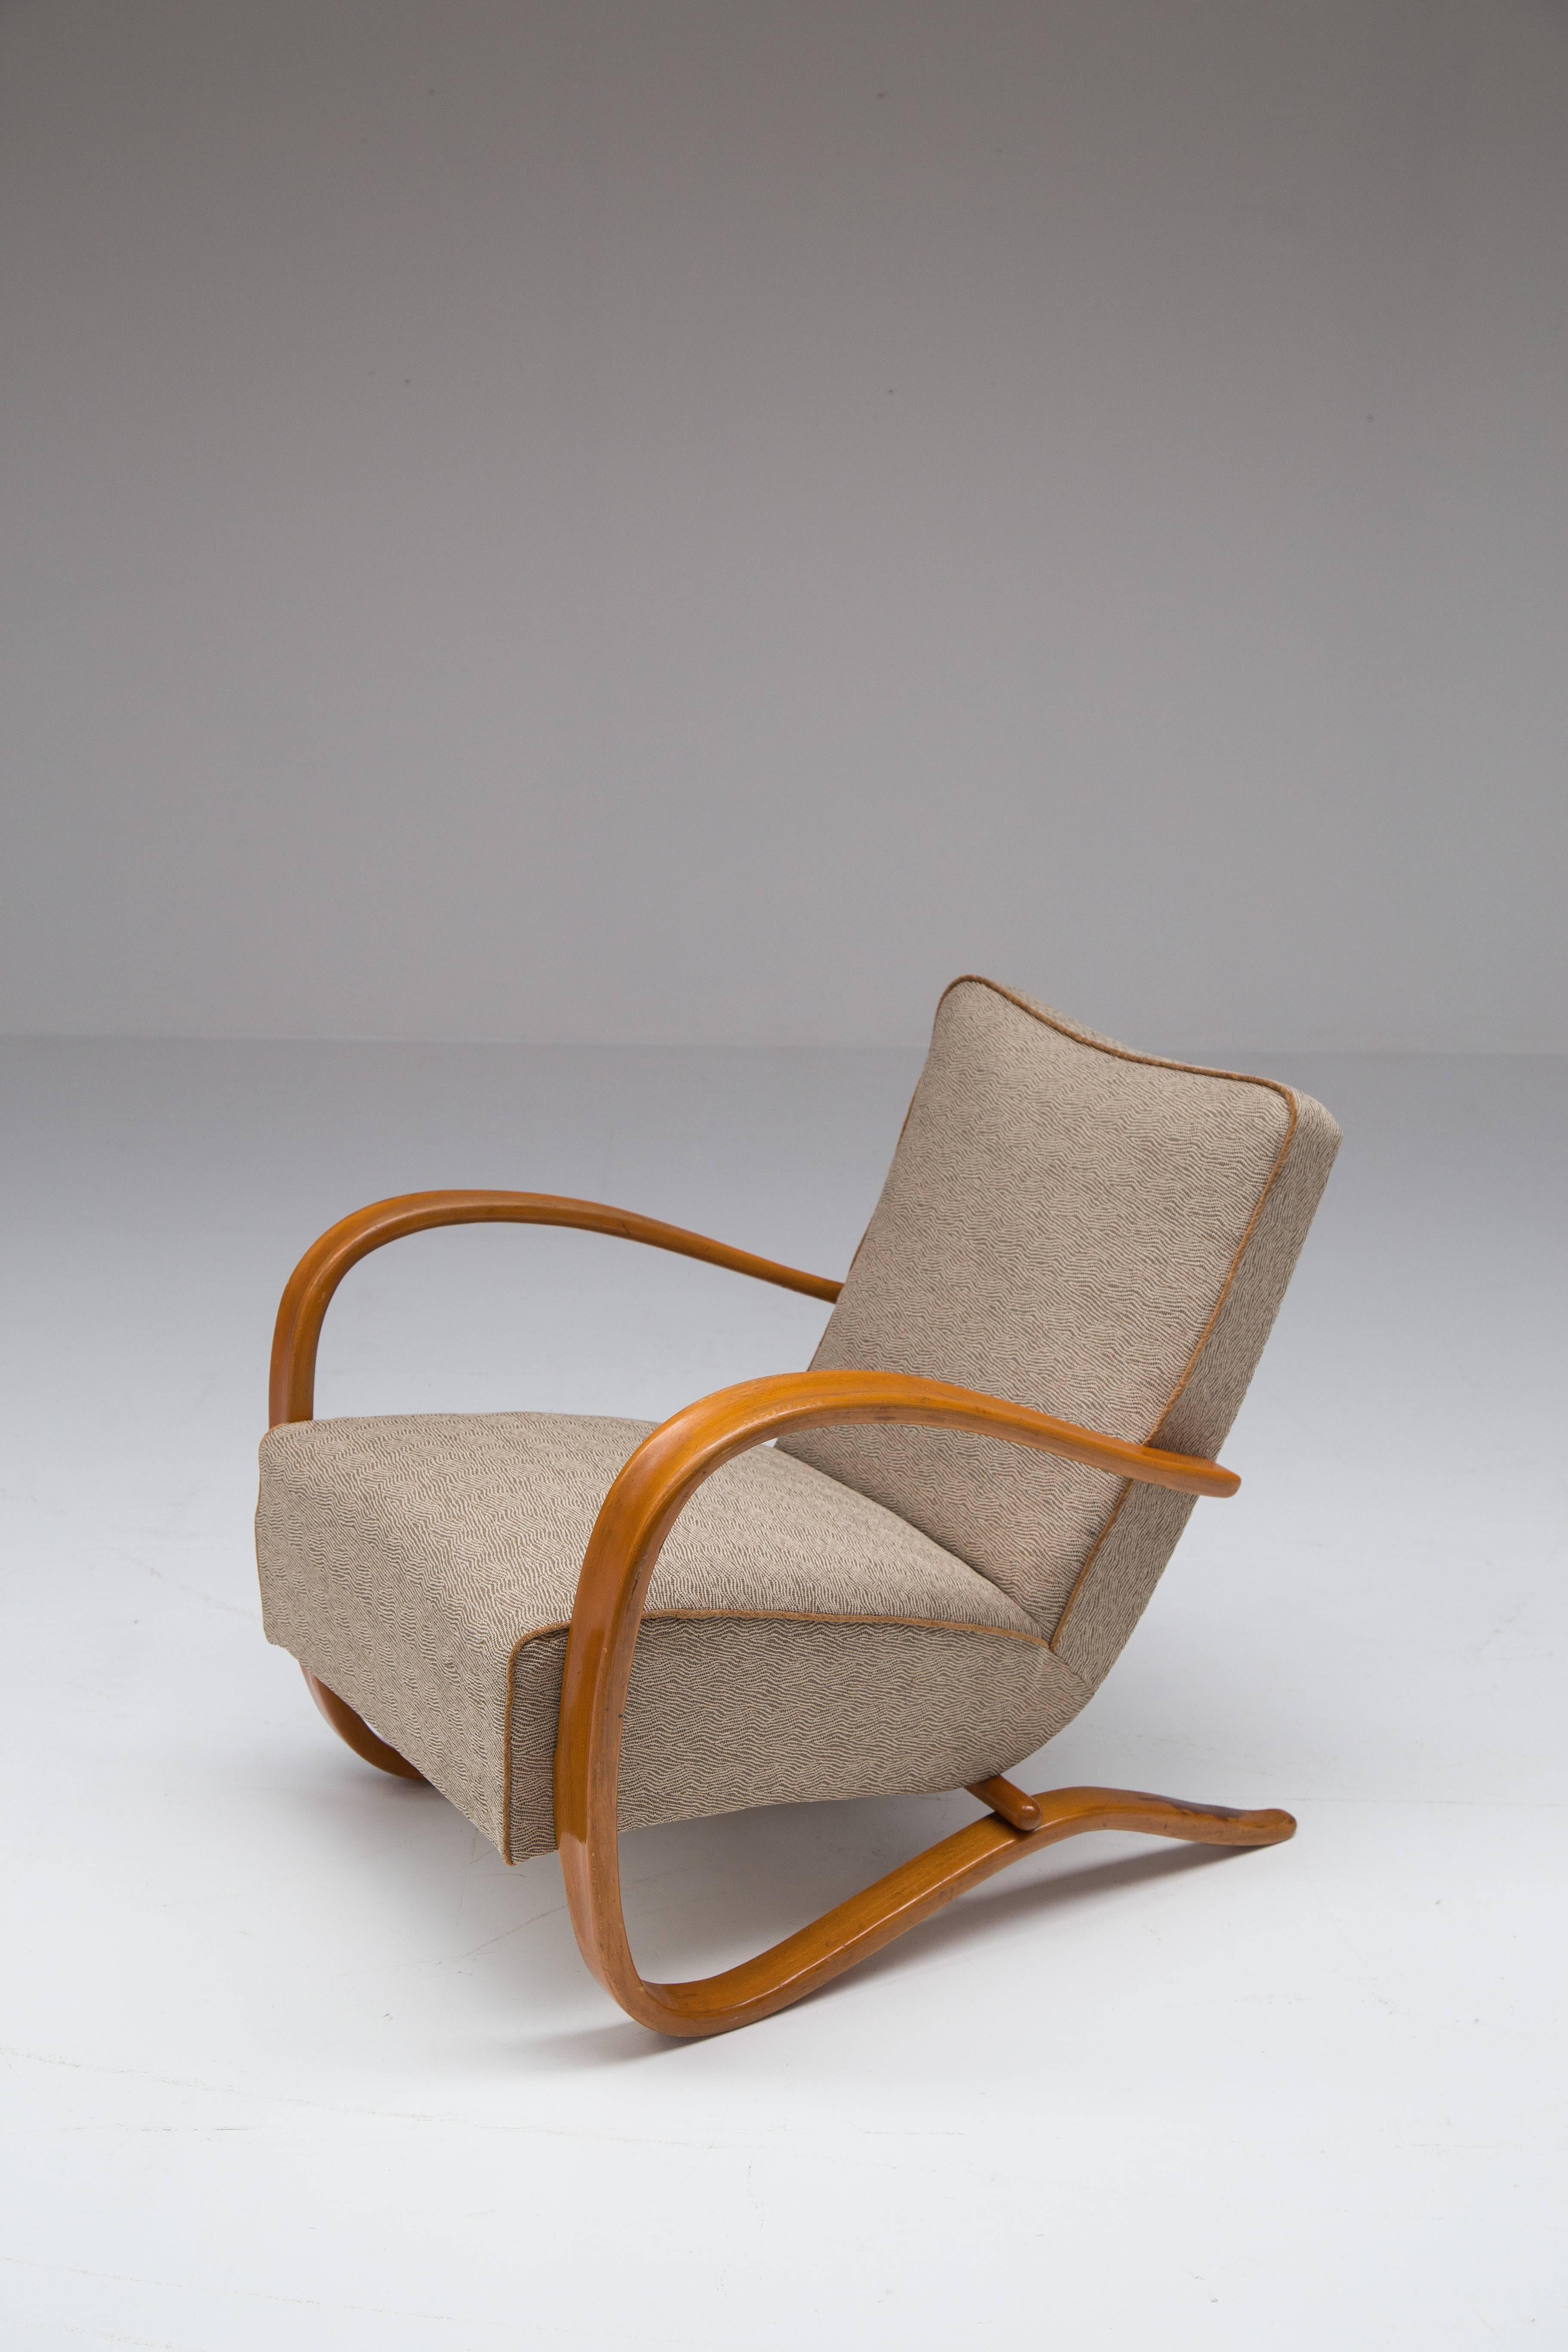 Art Deco lounge chair designed by Jindrich Halabala in 1930.